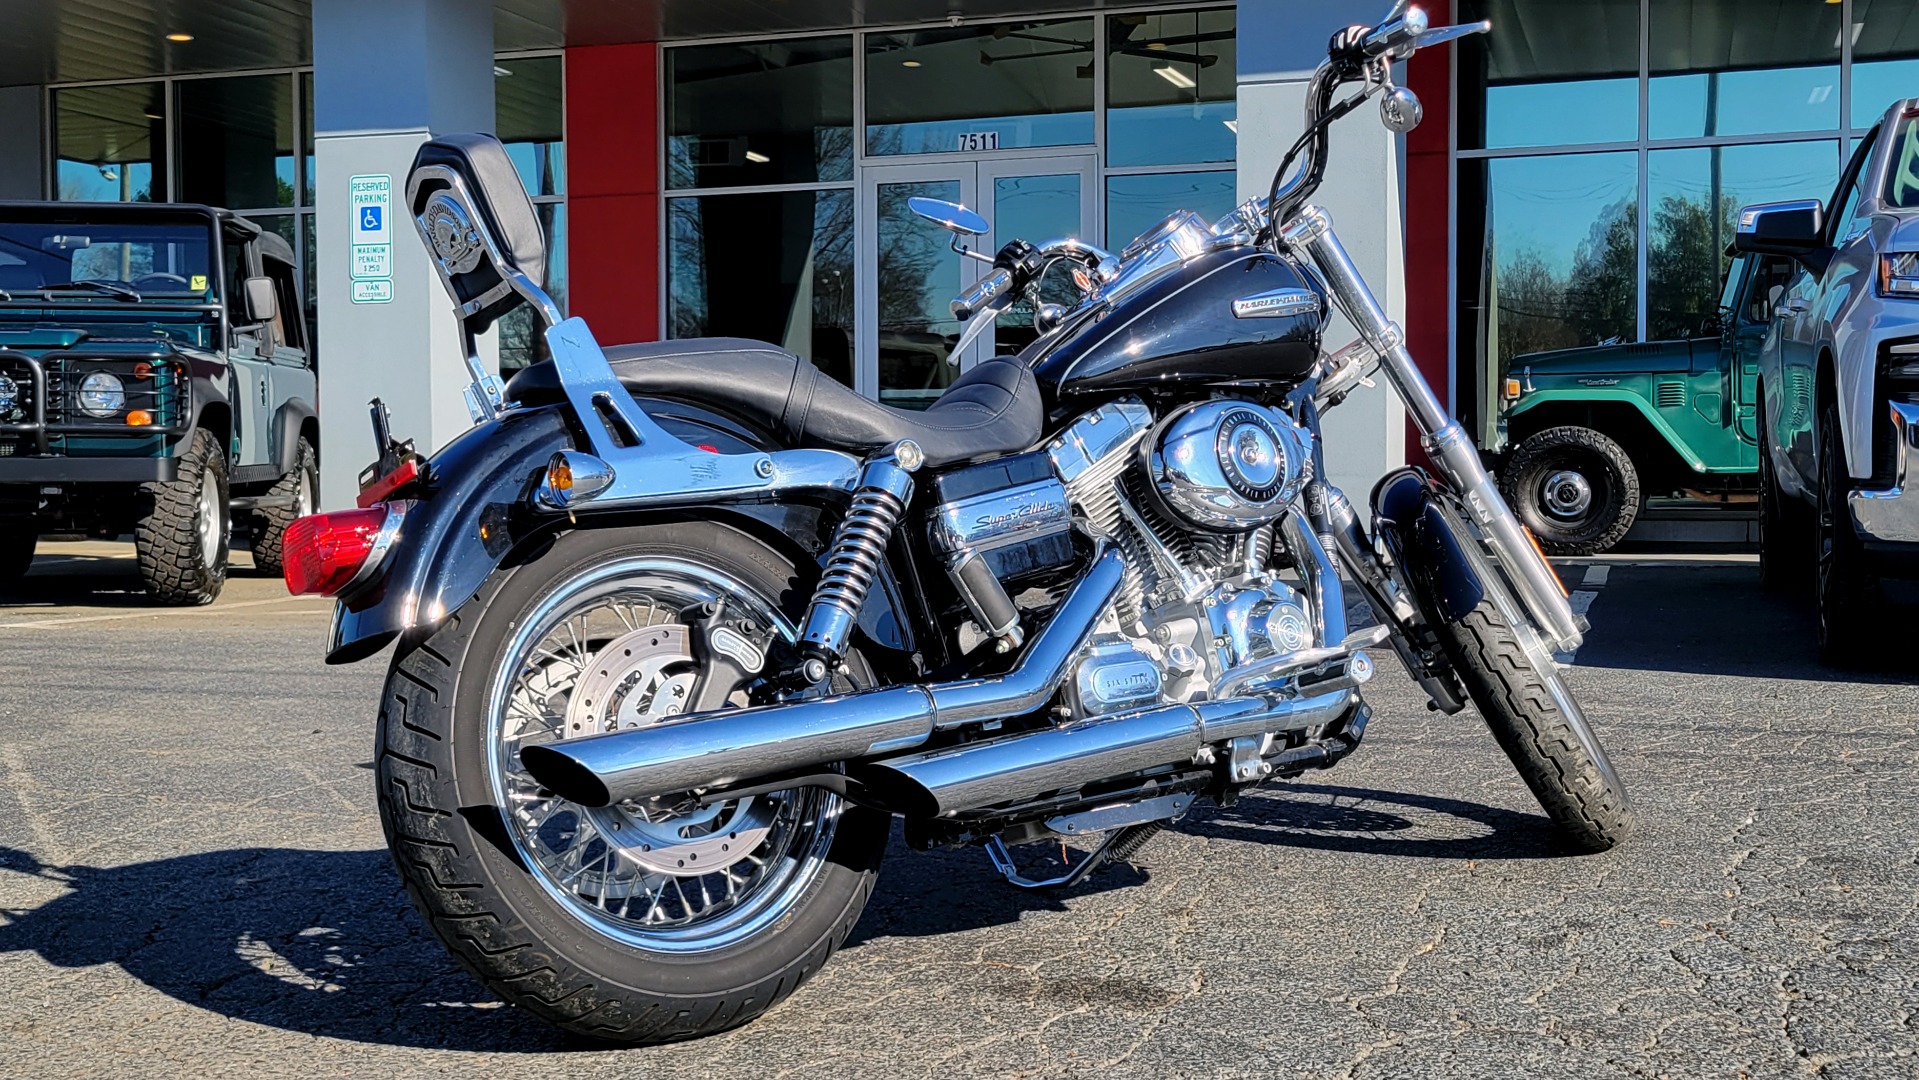 Used 2007 Harley Davidson SUPER GLIDE 1600CC / DYNA GLIDE / LOTS OF CHROME / ONLY 45 MILES for sale Sold at Formula Imports in Charlotte NC 28227 16